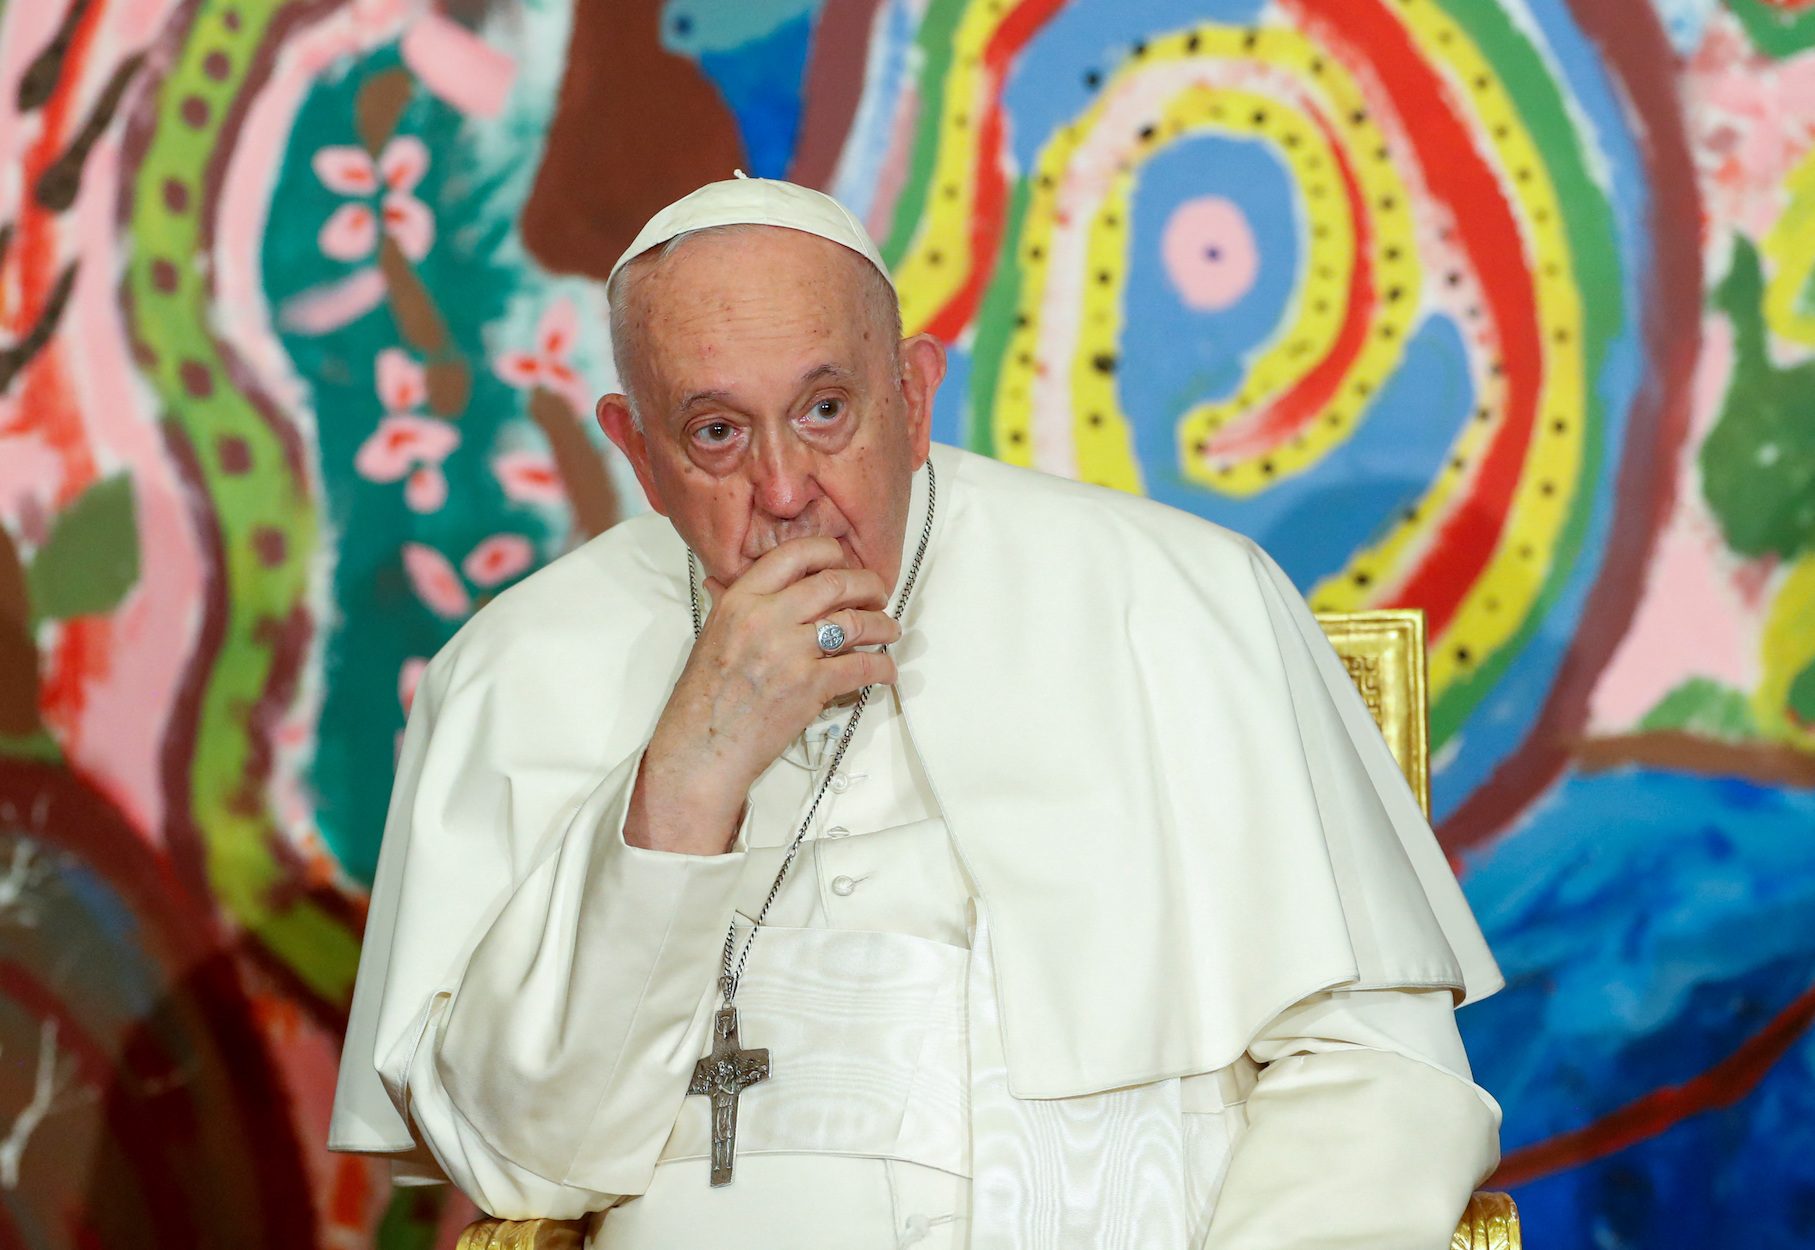 Pope Francis skipped audiences because of a fever, Vatican says